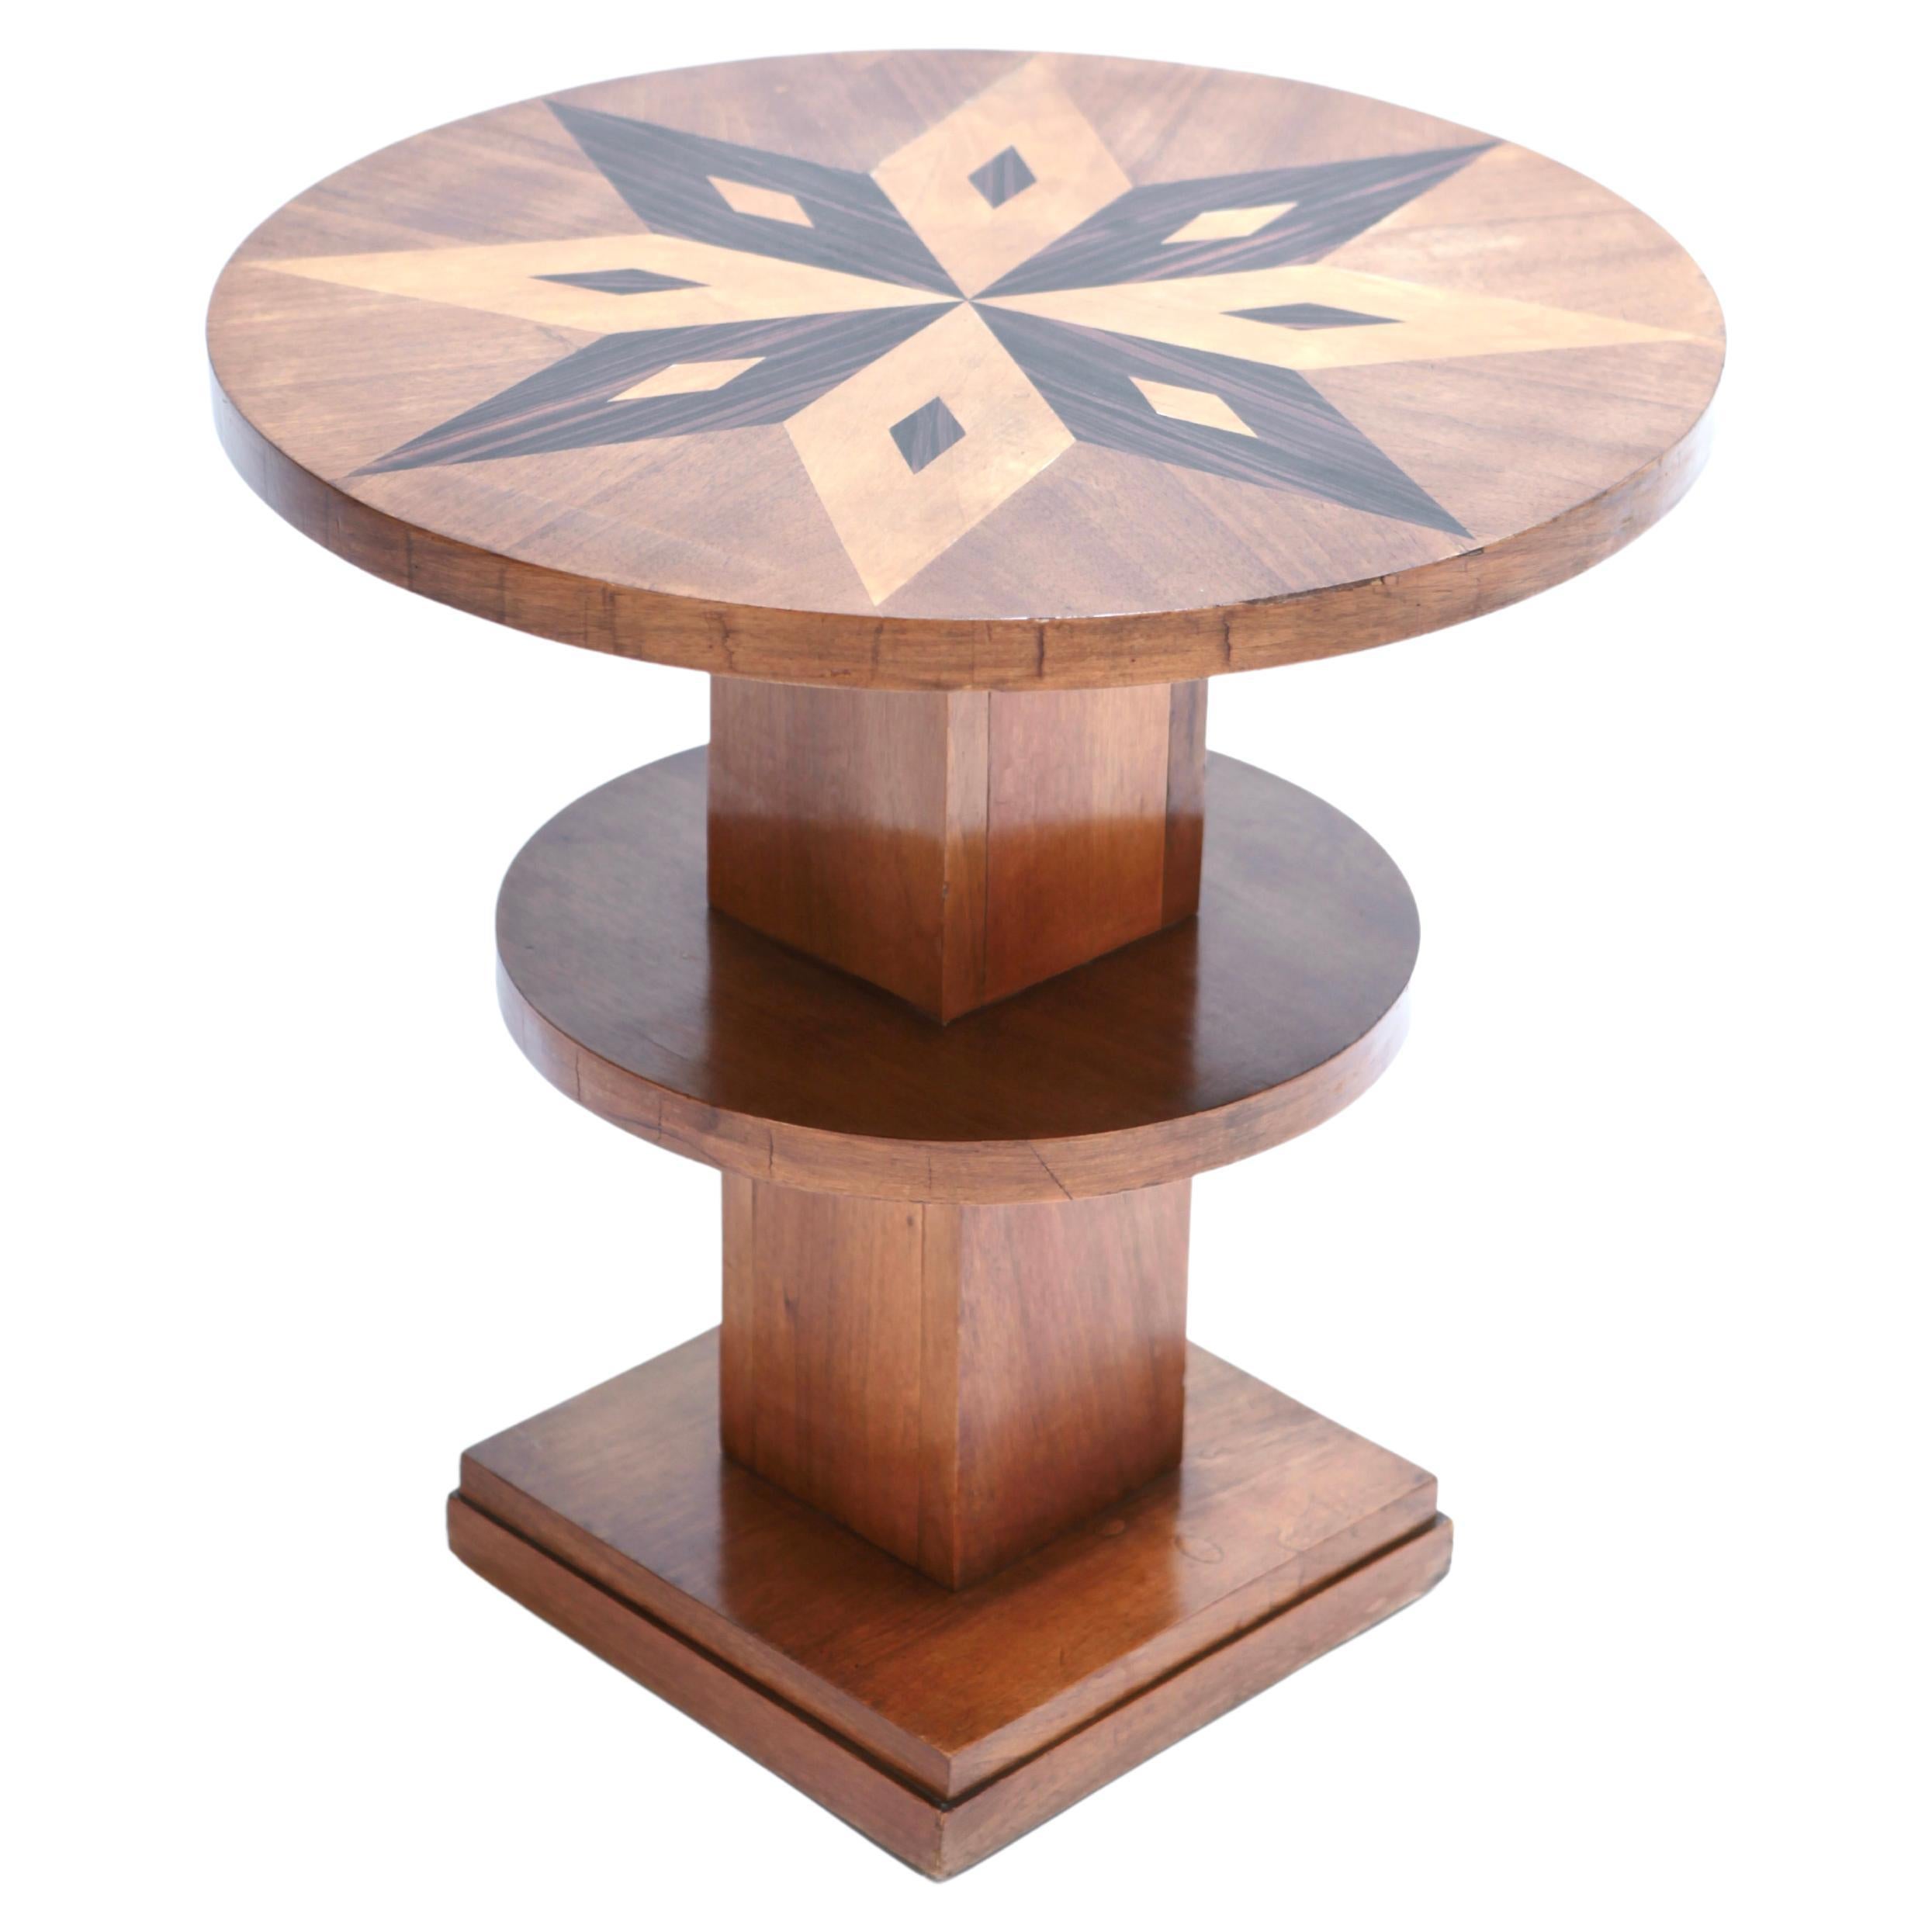 A French Art Deco Side Table, Wood Inlayed & Veneer, France 1930s